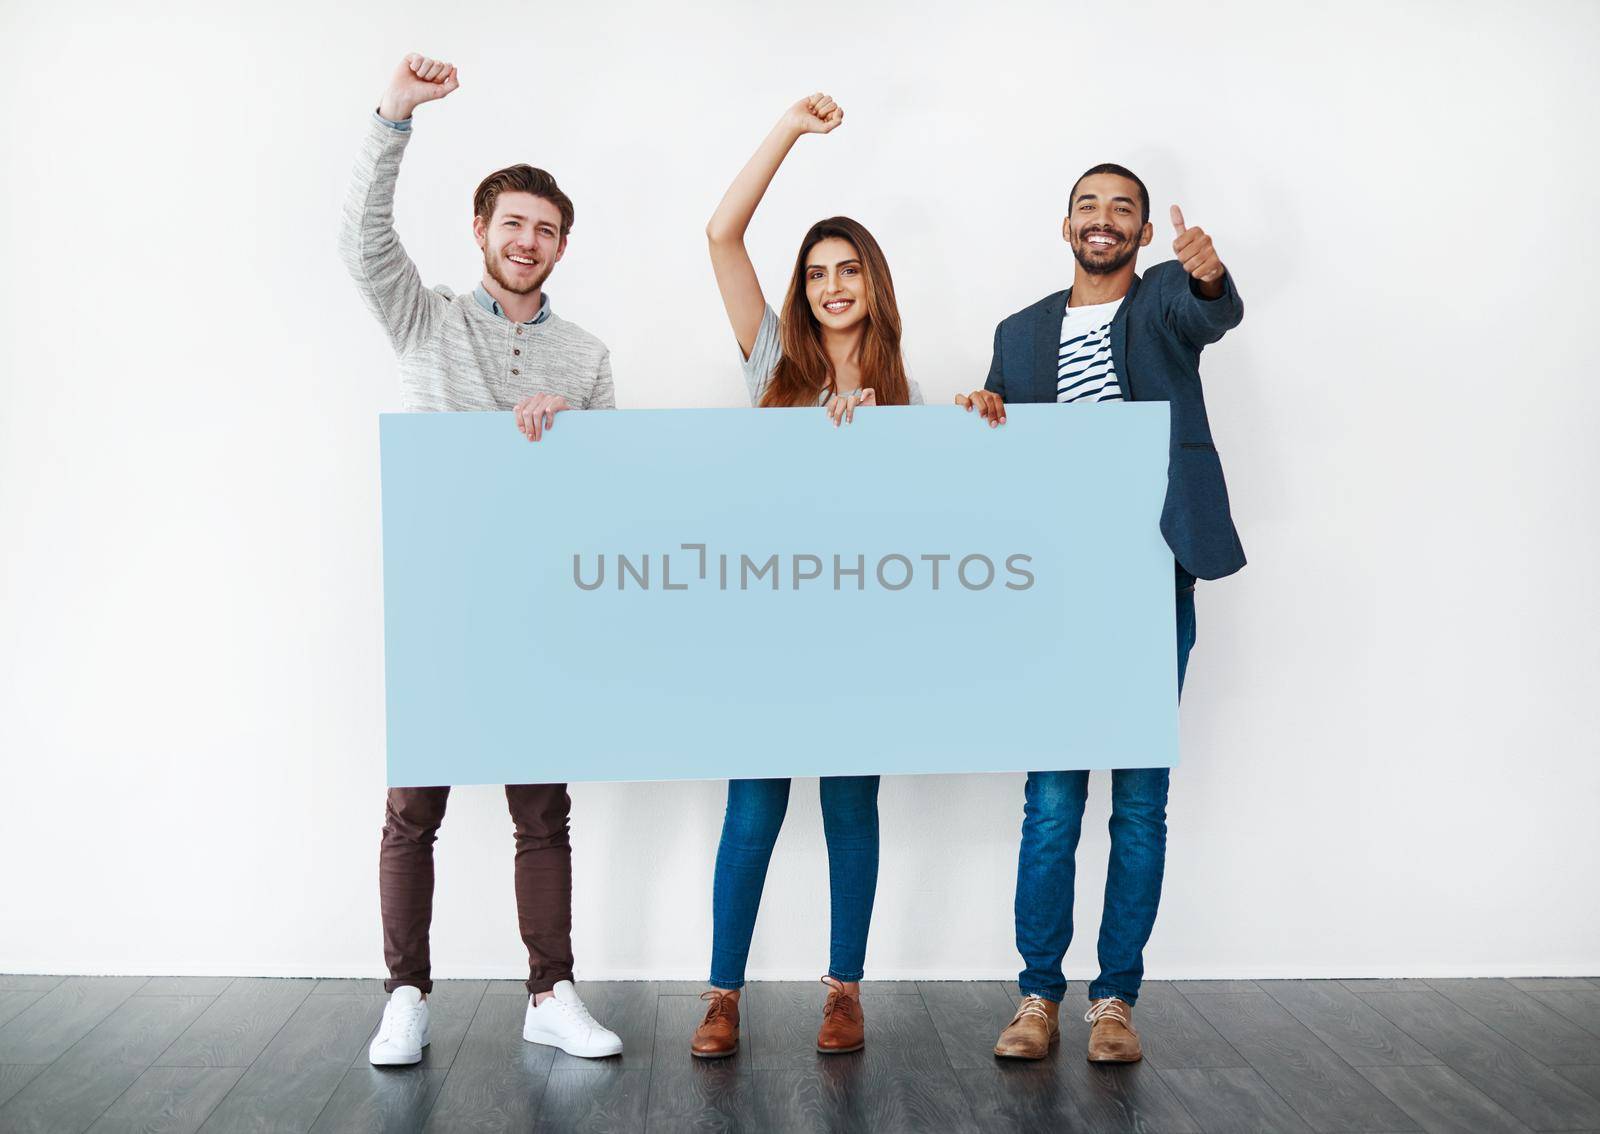 We absolutely love it. Studio shot of a diverse group of young people holding a blank placard and cheering against a white background